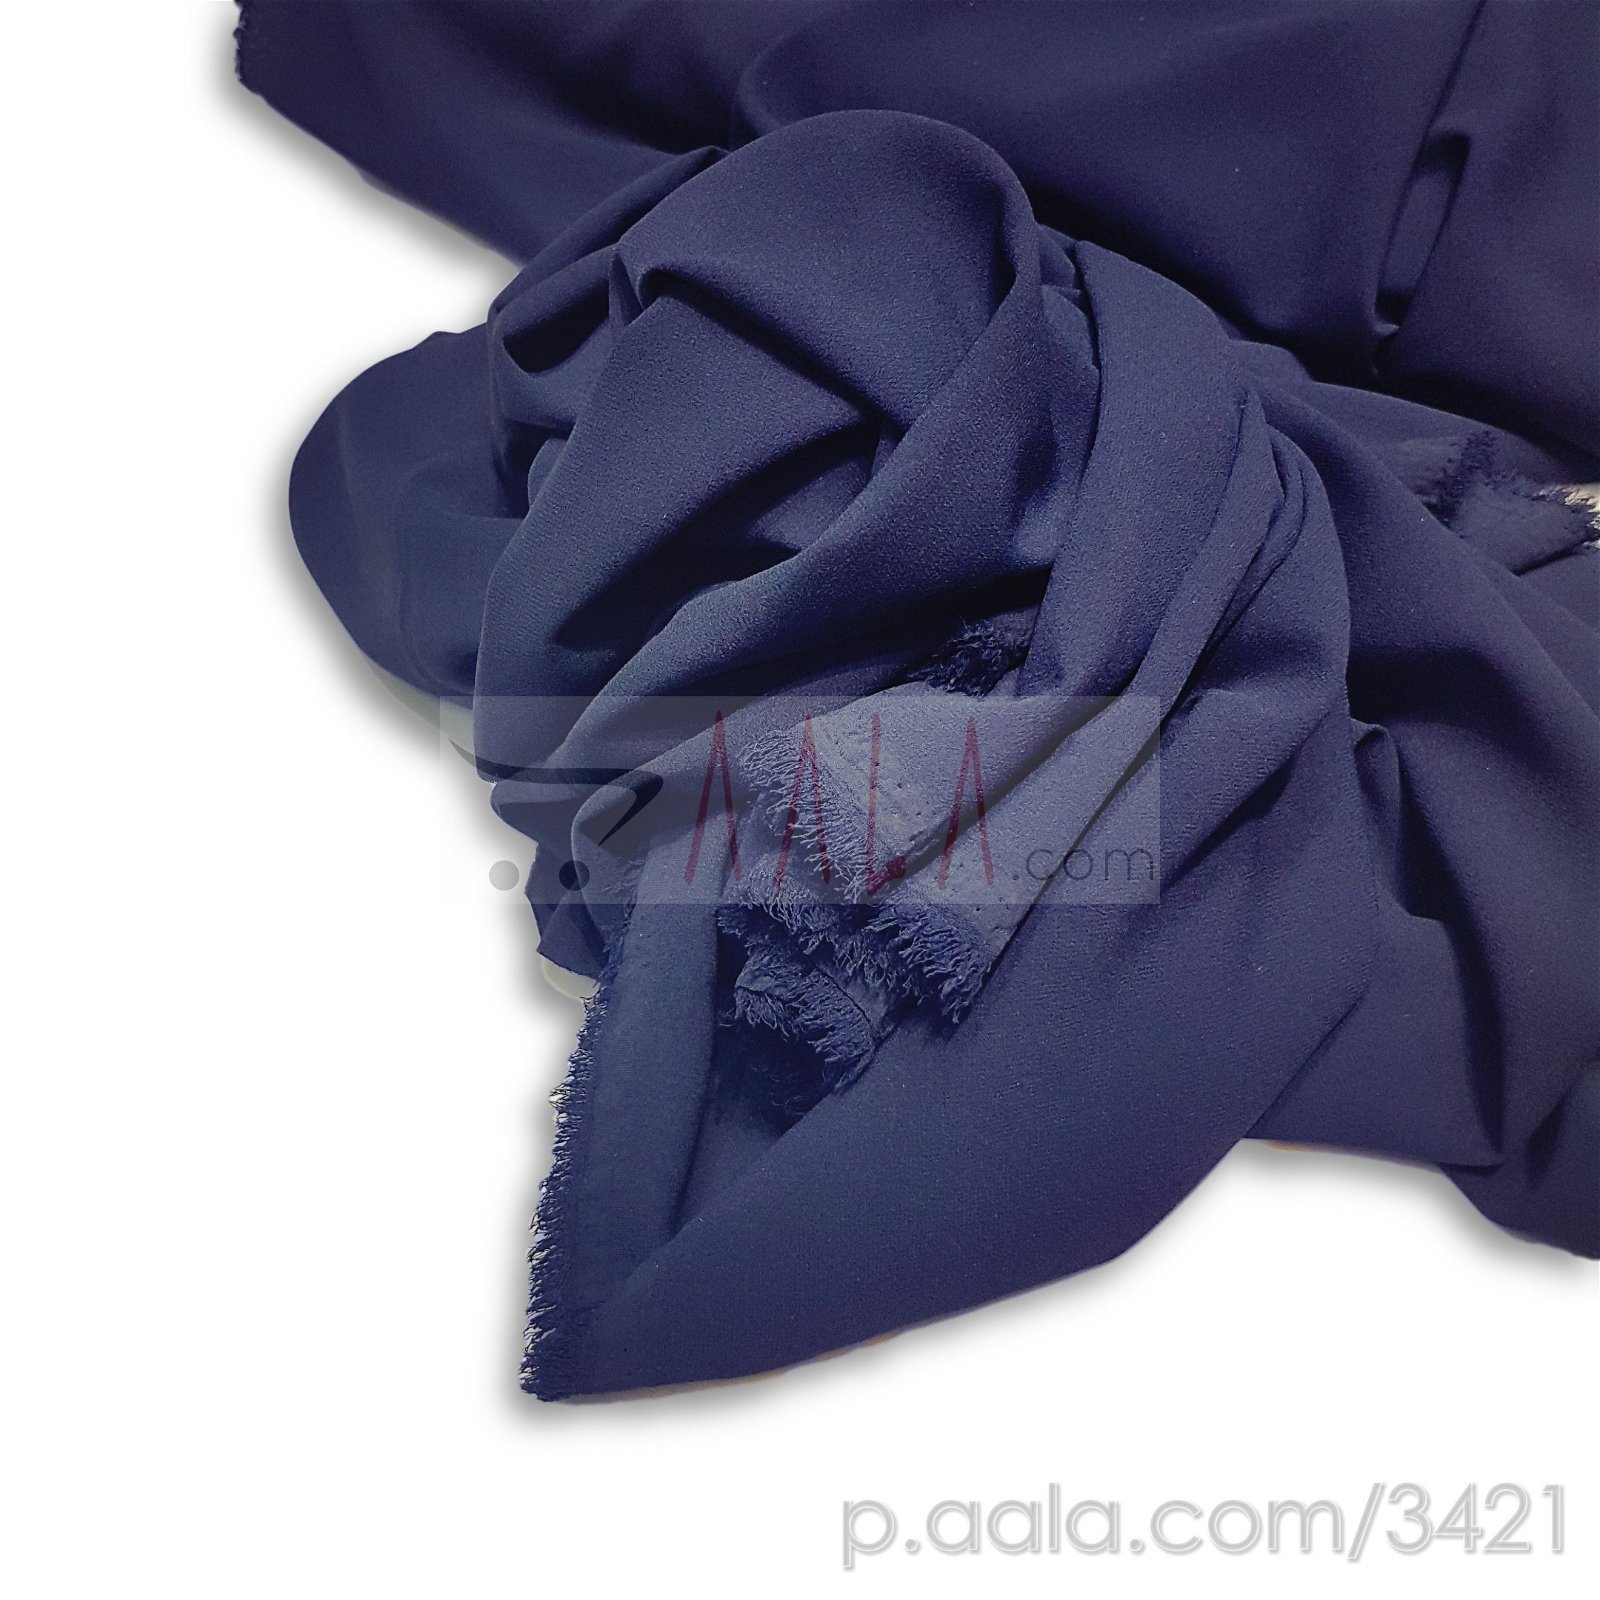 Double Georgette Poly-ester 44 Inches Dyed Per Metre #3421